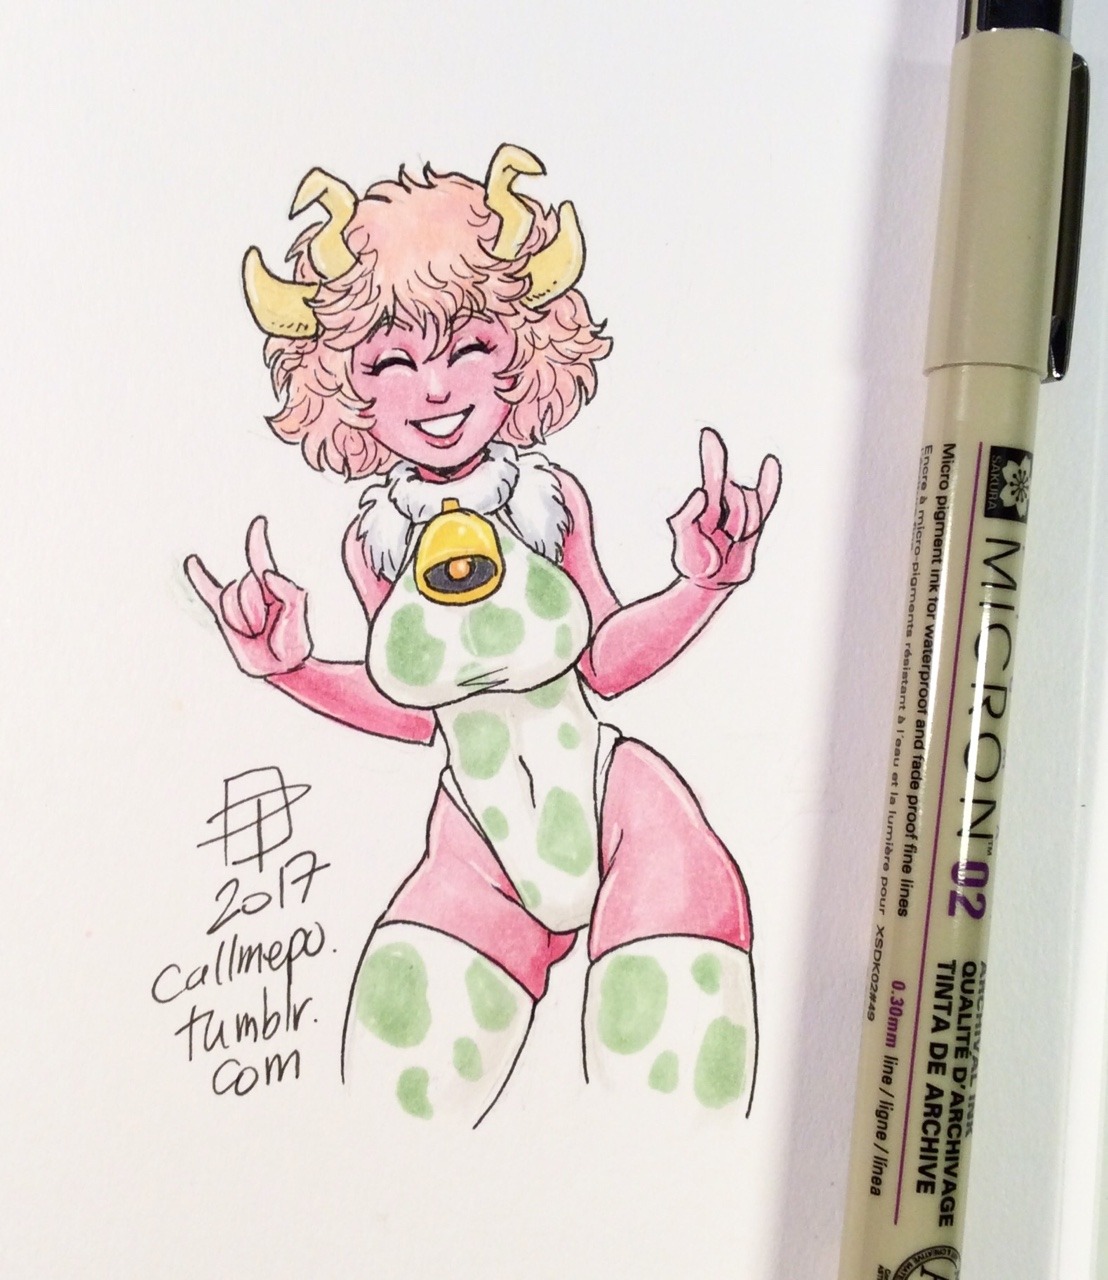 callmepo: Alien Cowbell Pinky!  Wanted to show people who made a donation to my Kofi